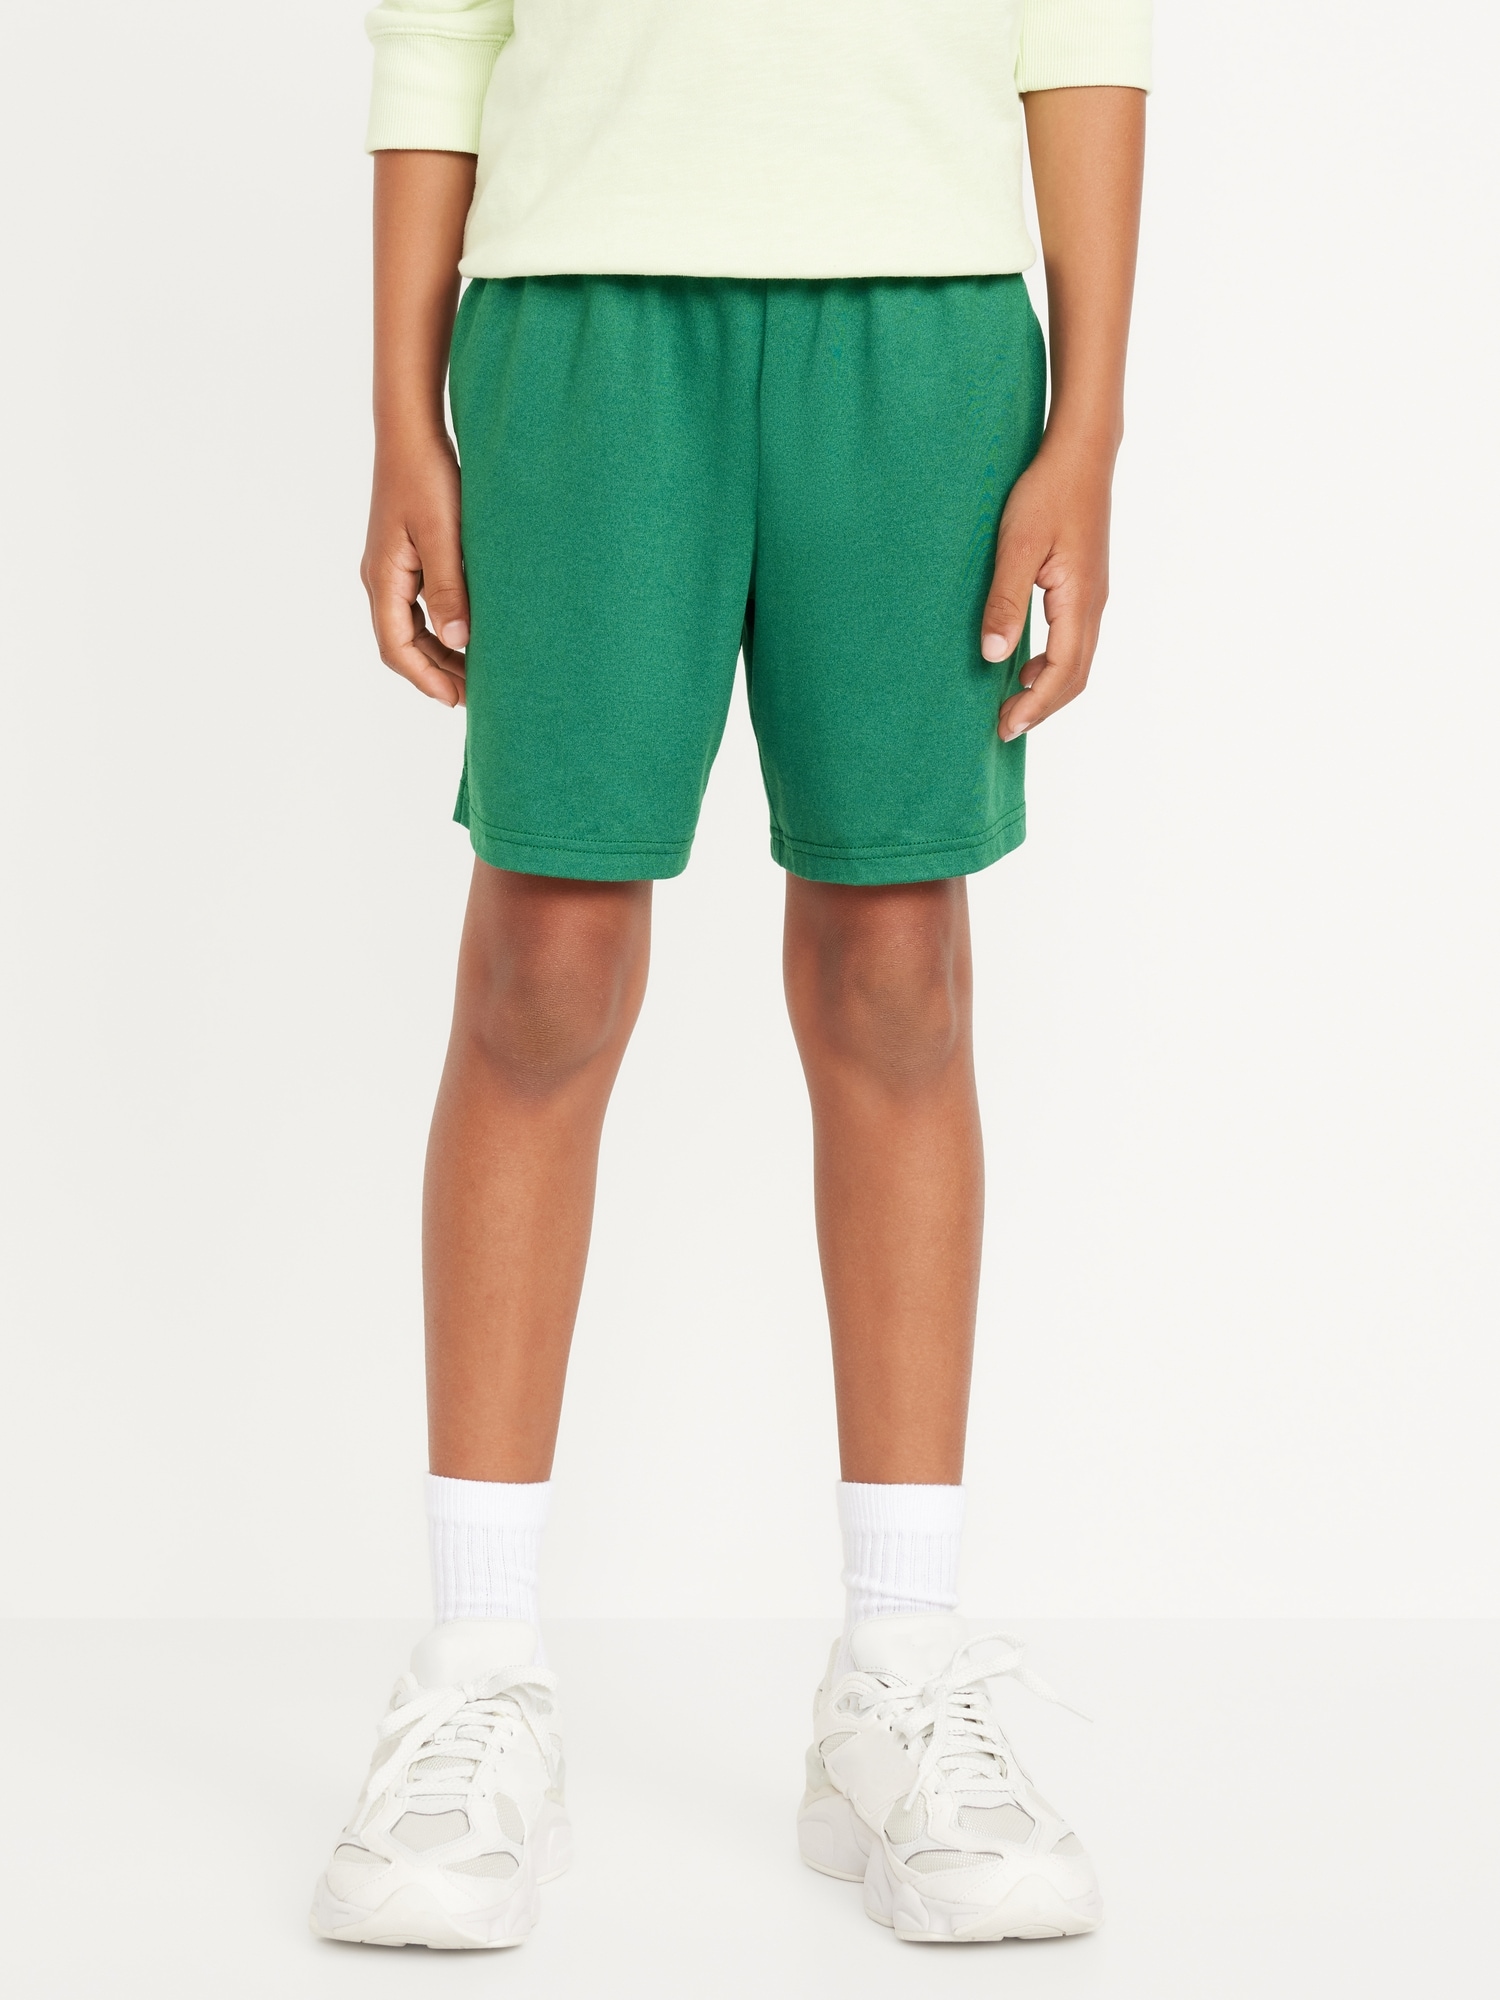 Cloud 94 Soft Performance Shorts for Boys (Above Knee)